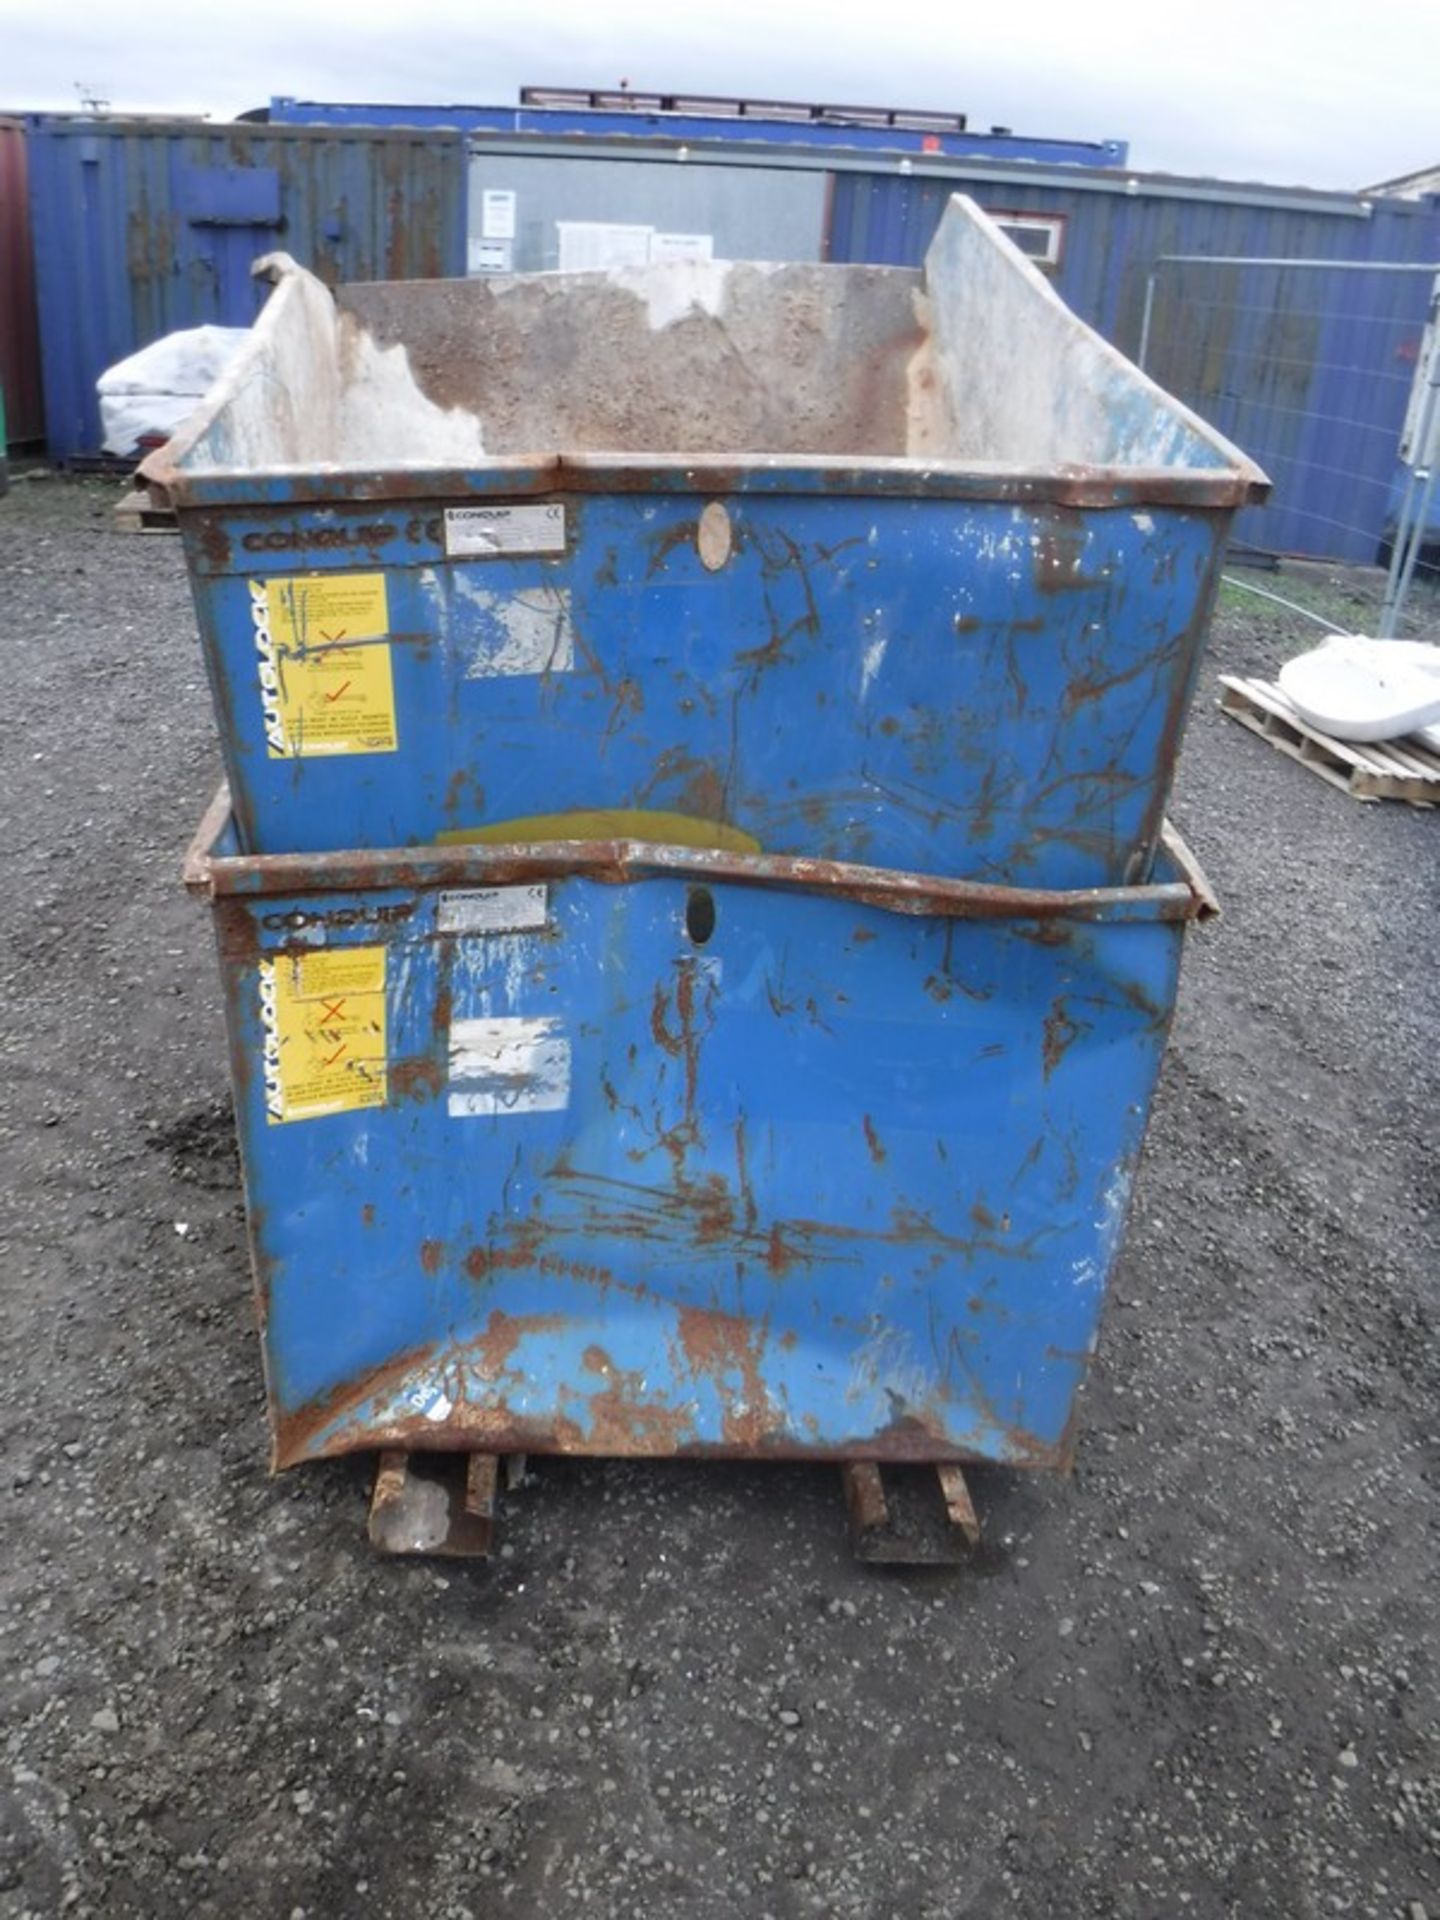 2015 CONQUIP 1200ltr tipping skips x 2 S/N CQ45589 & CQ47577 - Image 3 of 6